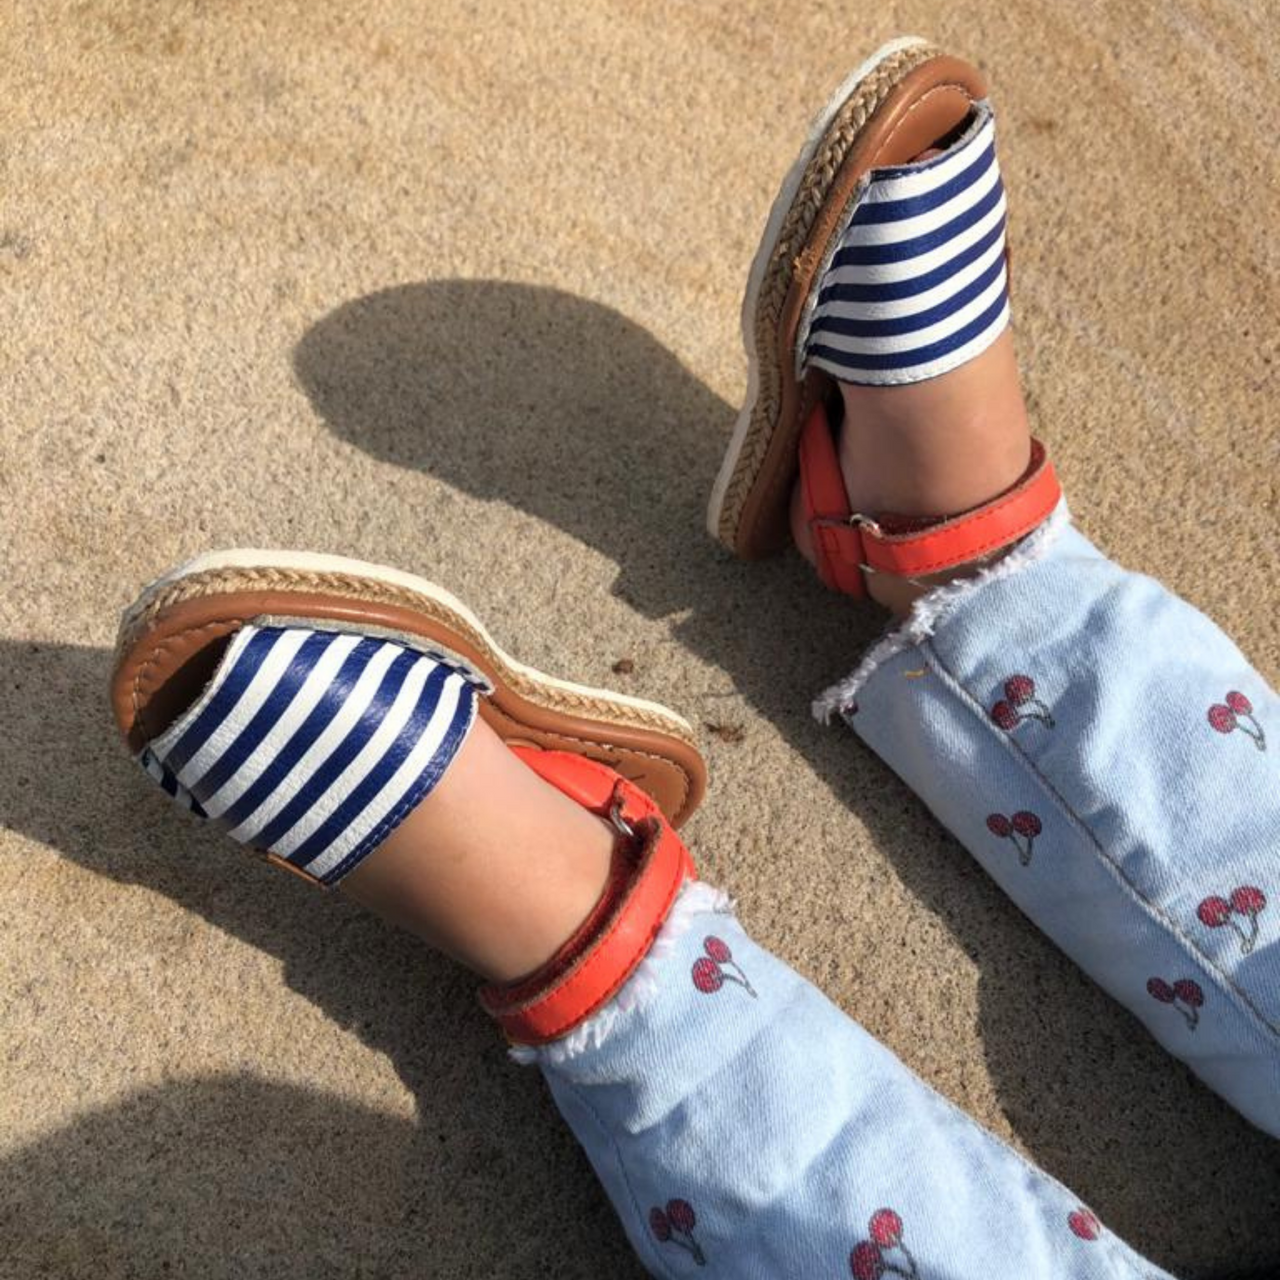 How to Choose the Best Avarca Sandals for Your Child